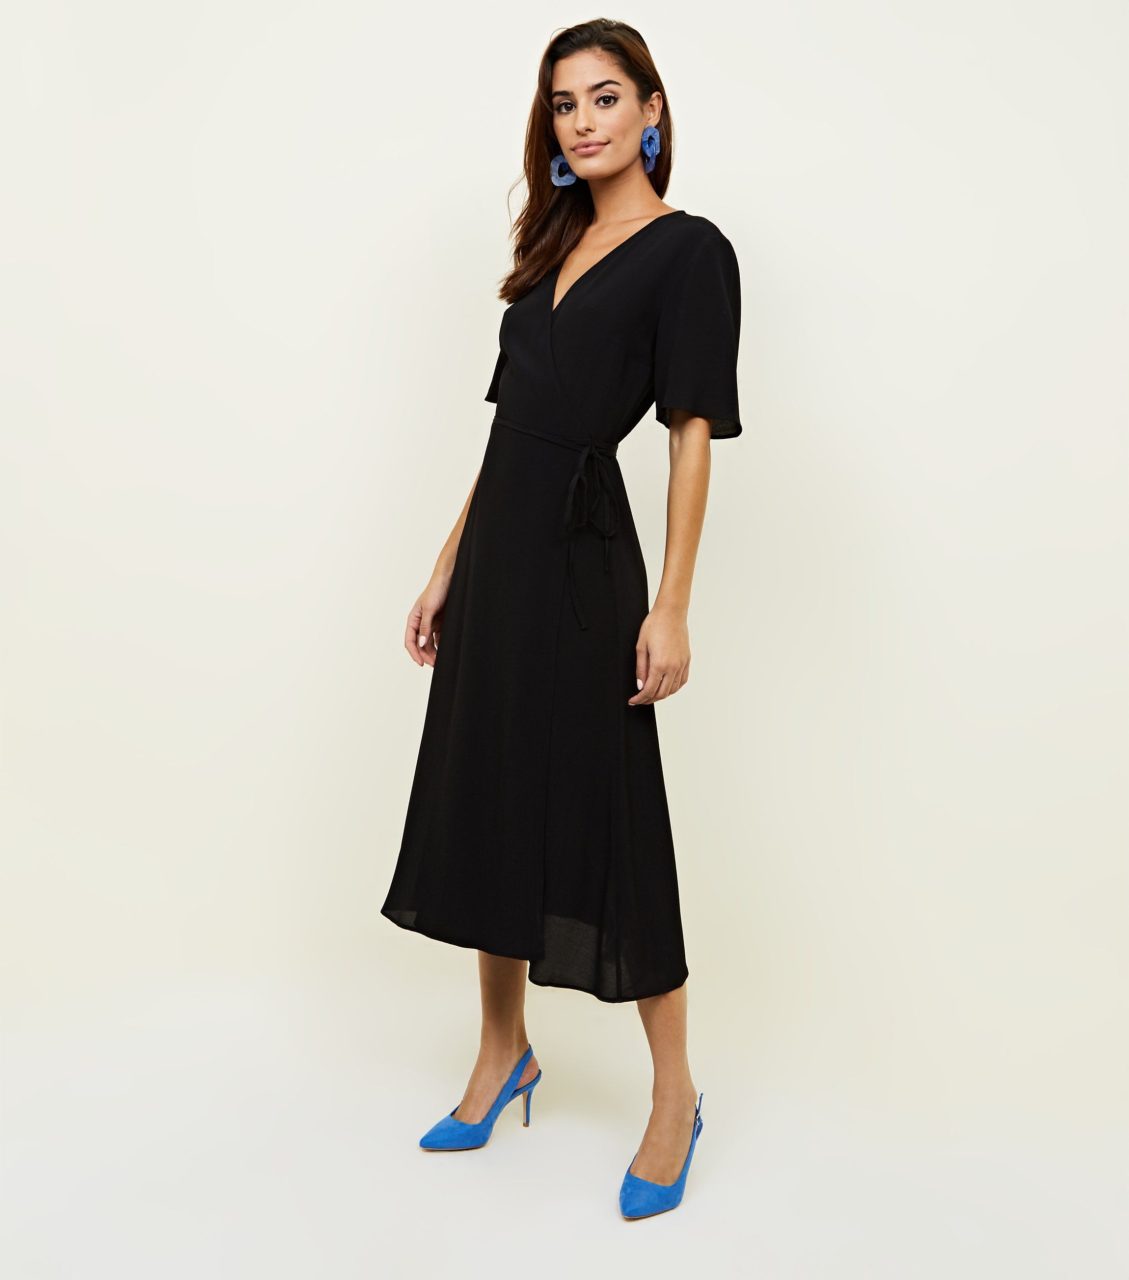 13 Stylish Wrap Dresses to Snap Up for Your Bridesmaids | weddingsonline